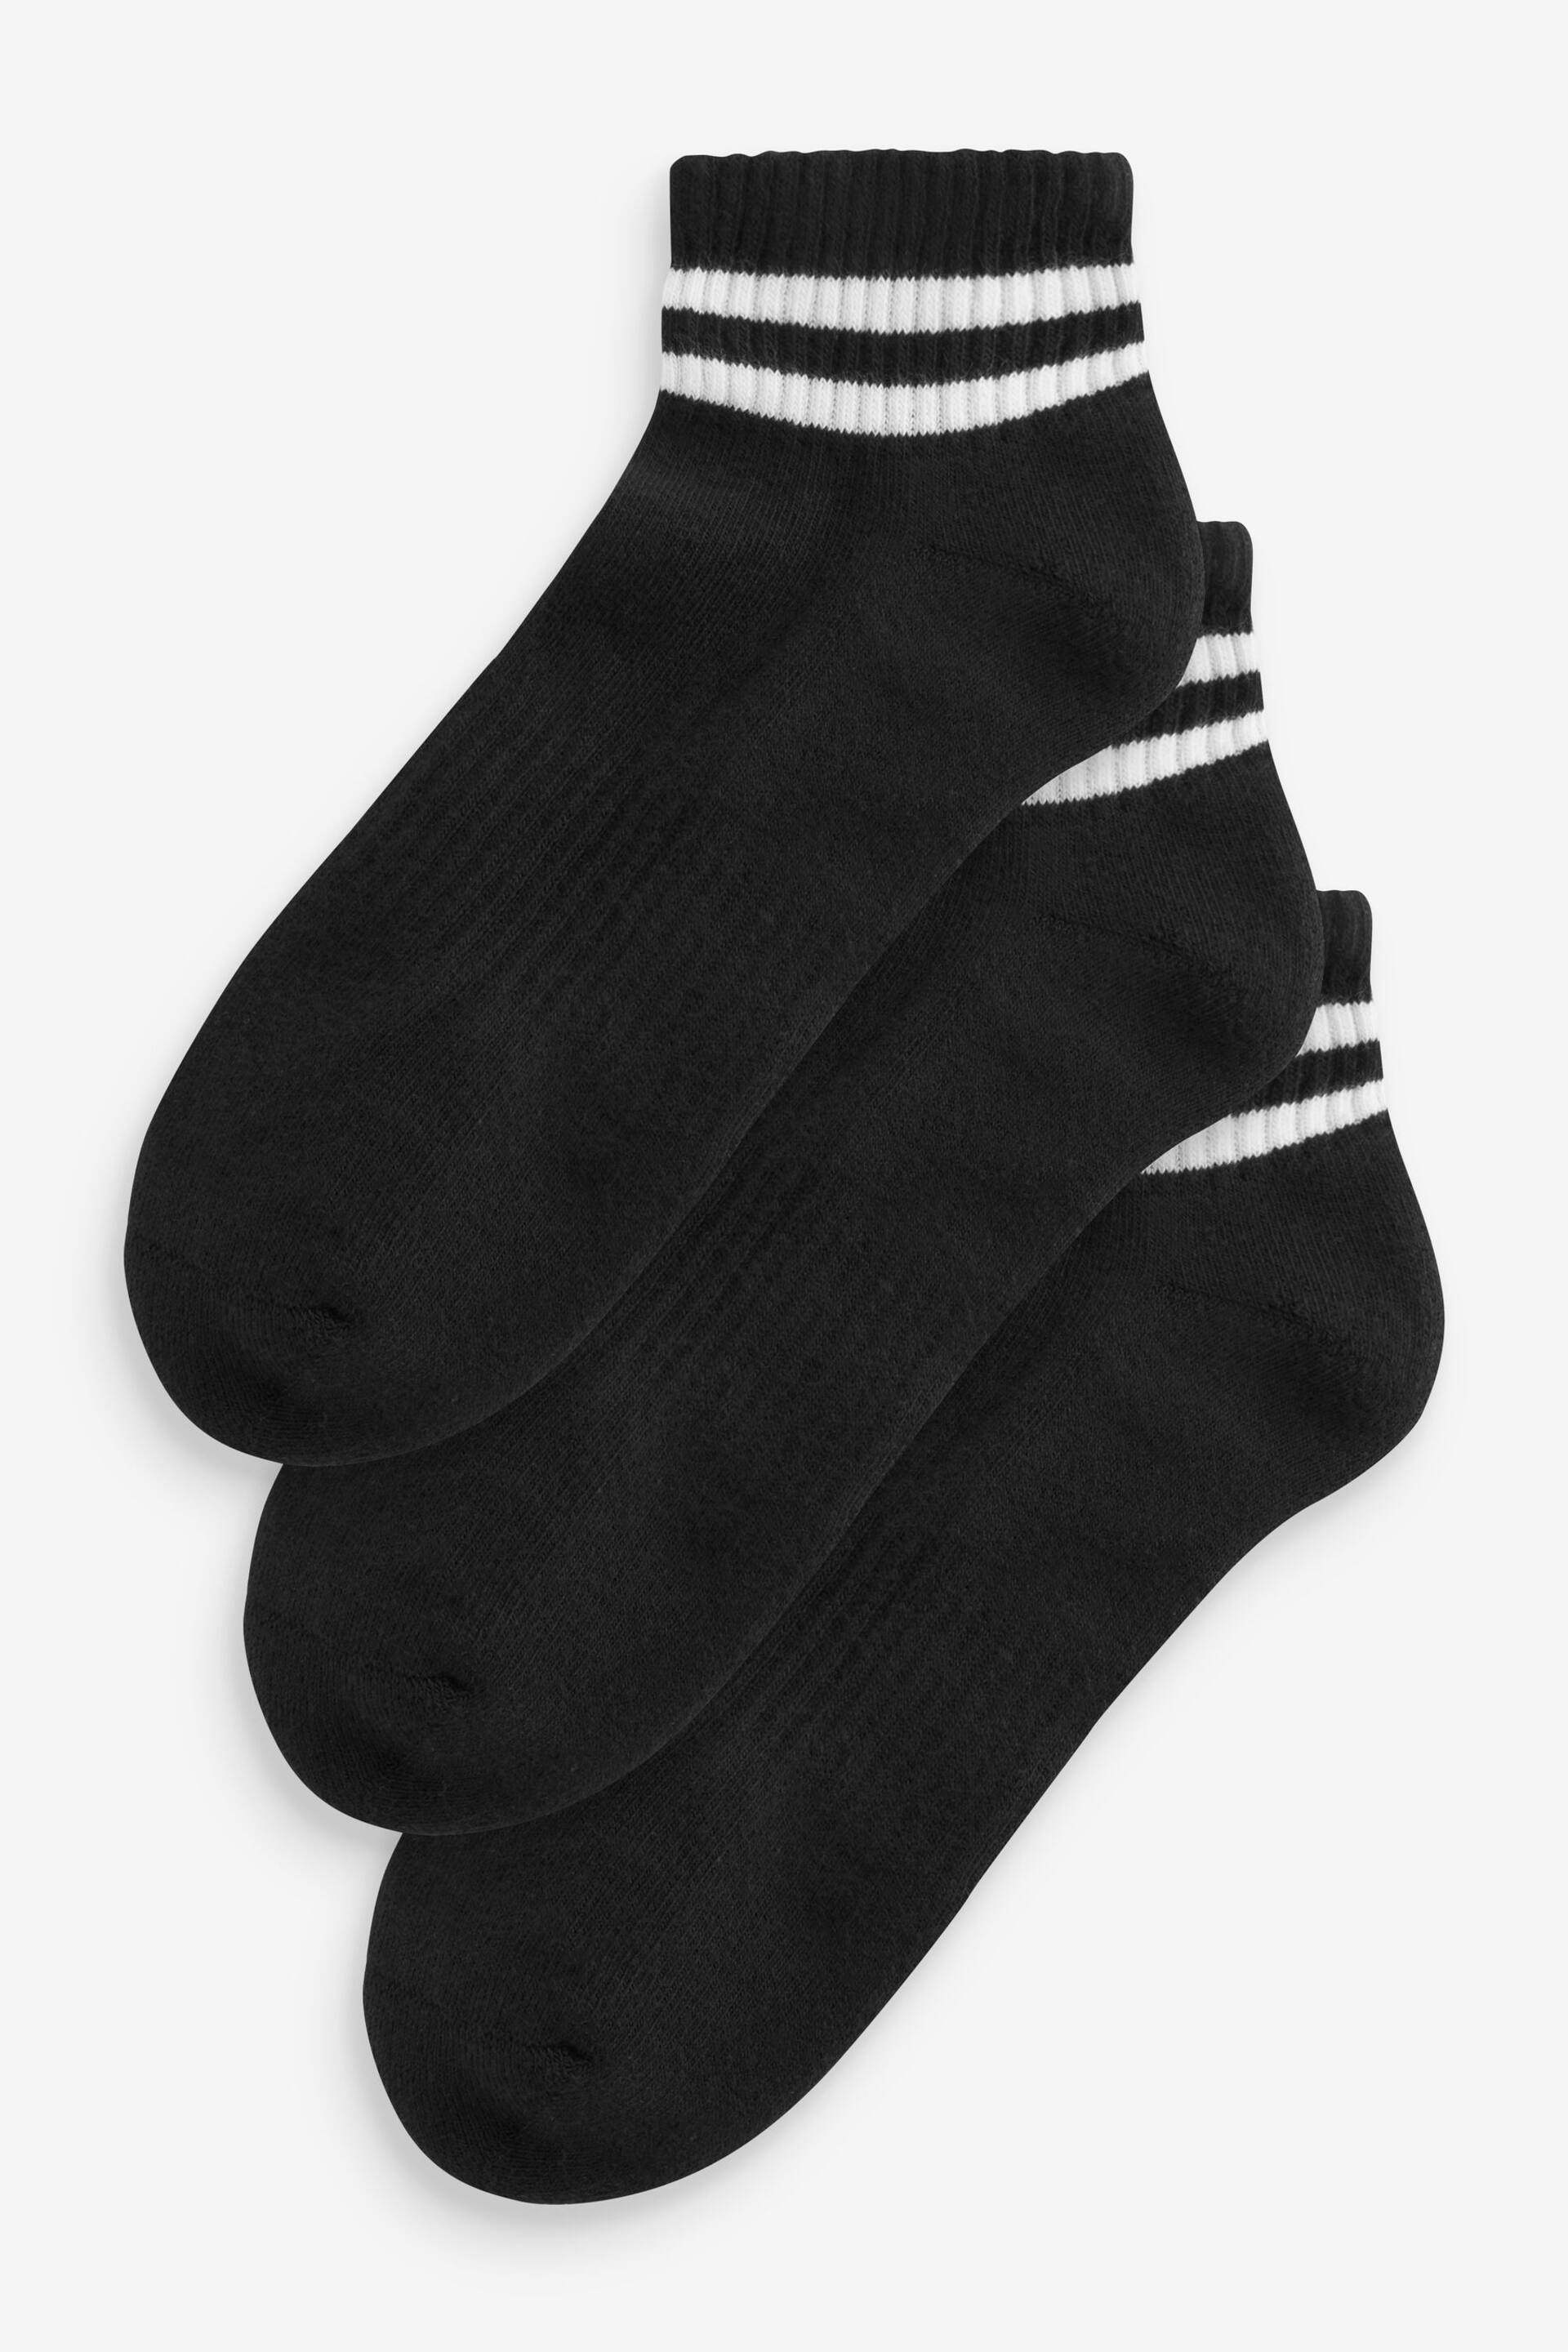 Black Stripe Cushion Sole Trainers Socks 3 Pack With Arch Support - Image 1 of 3